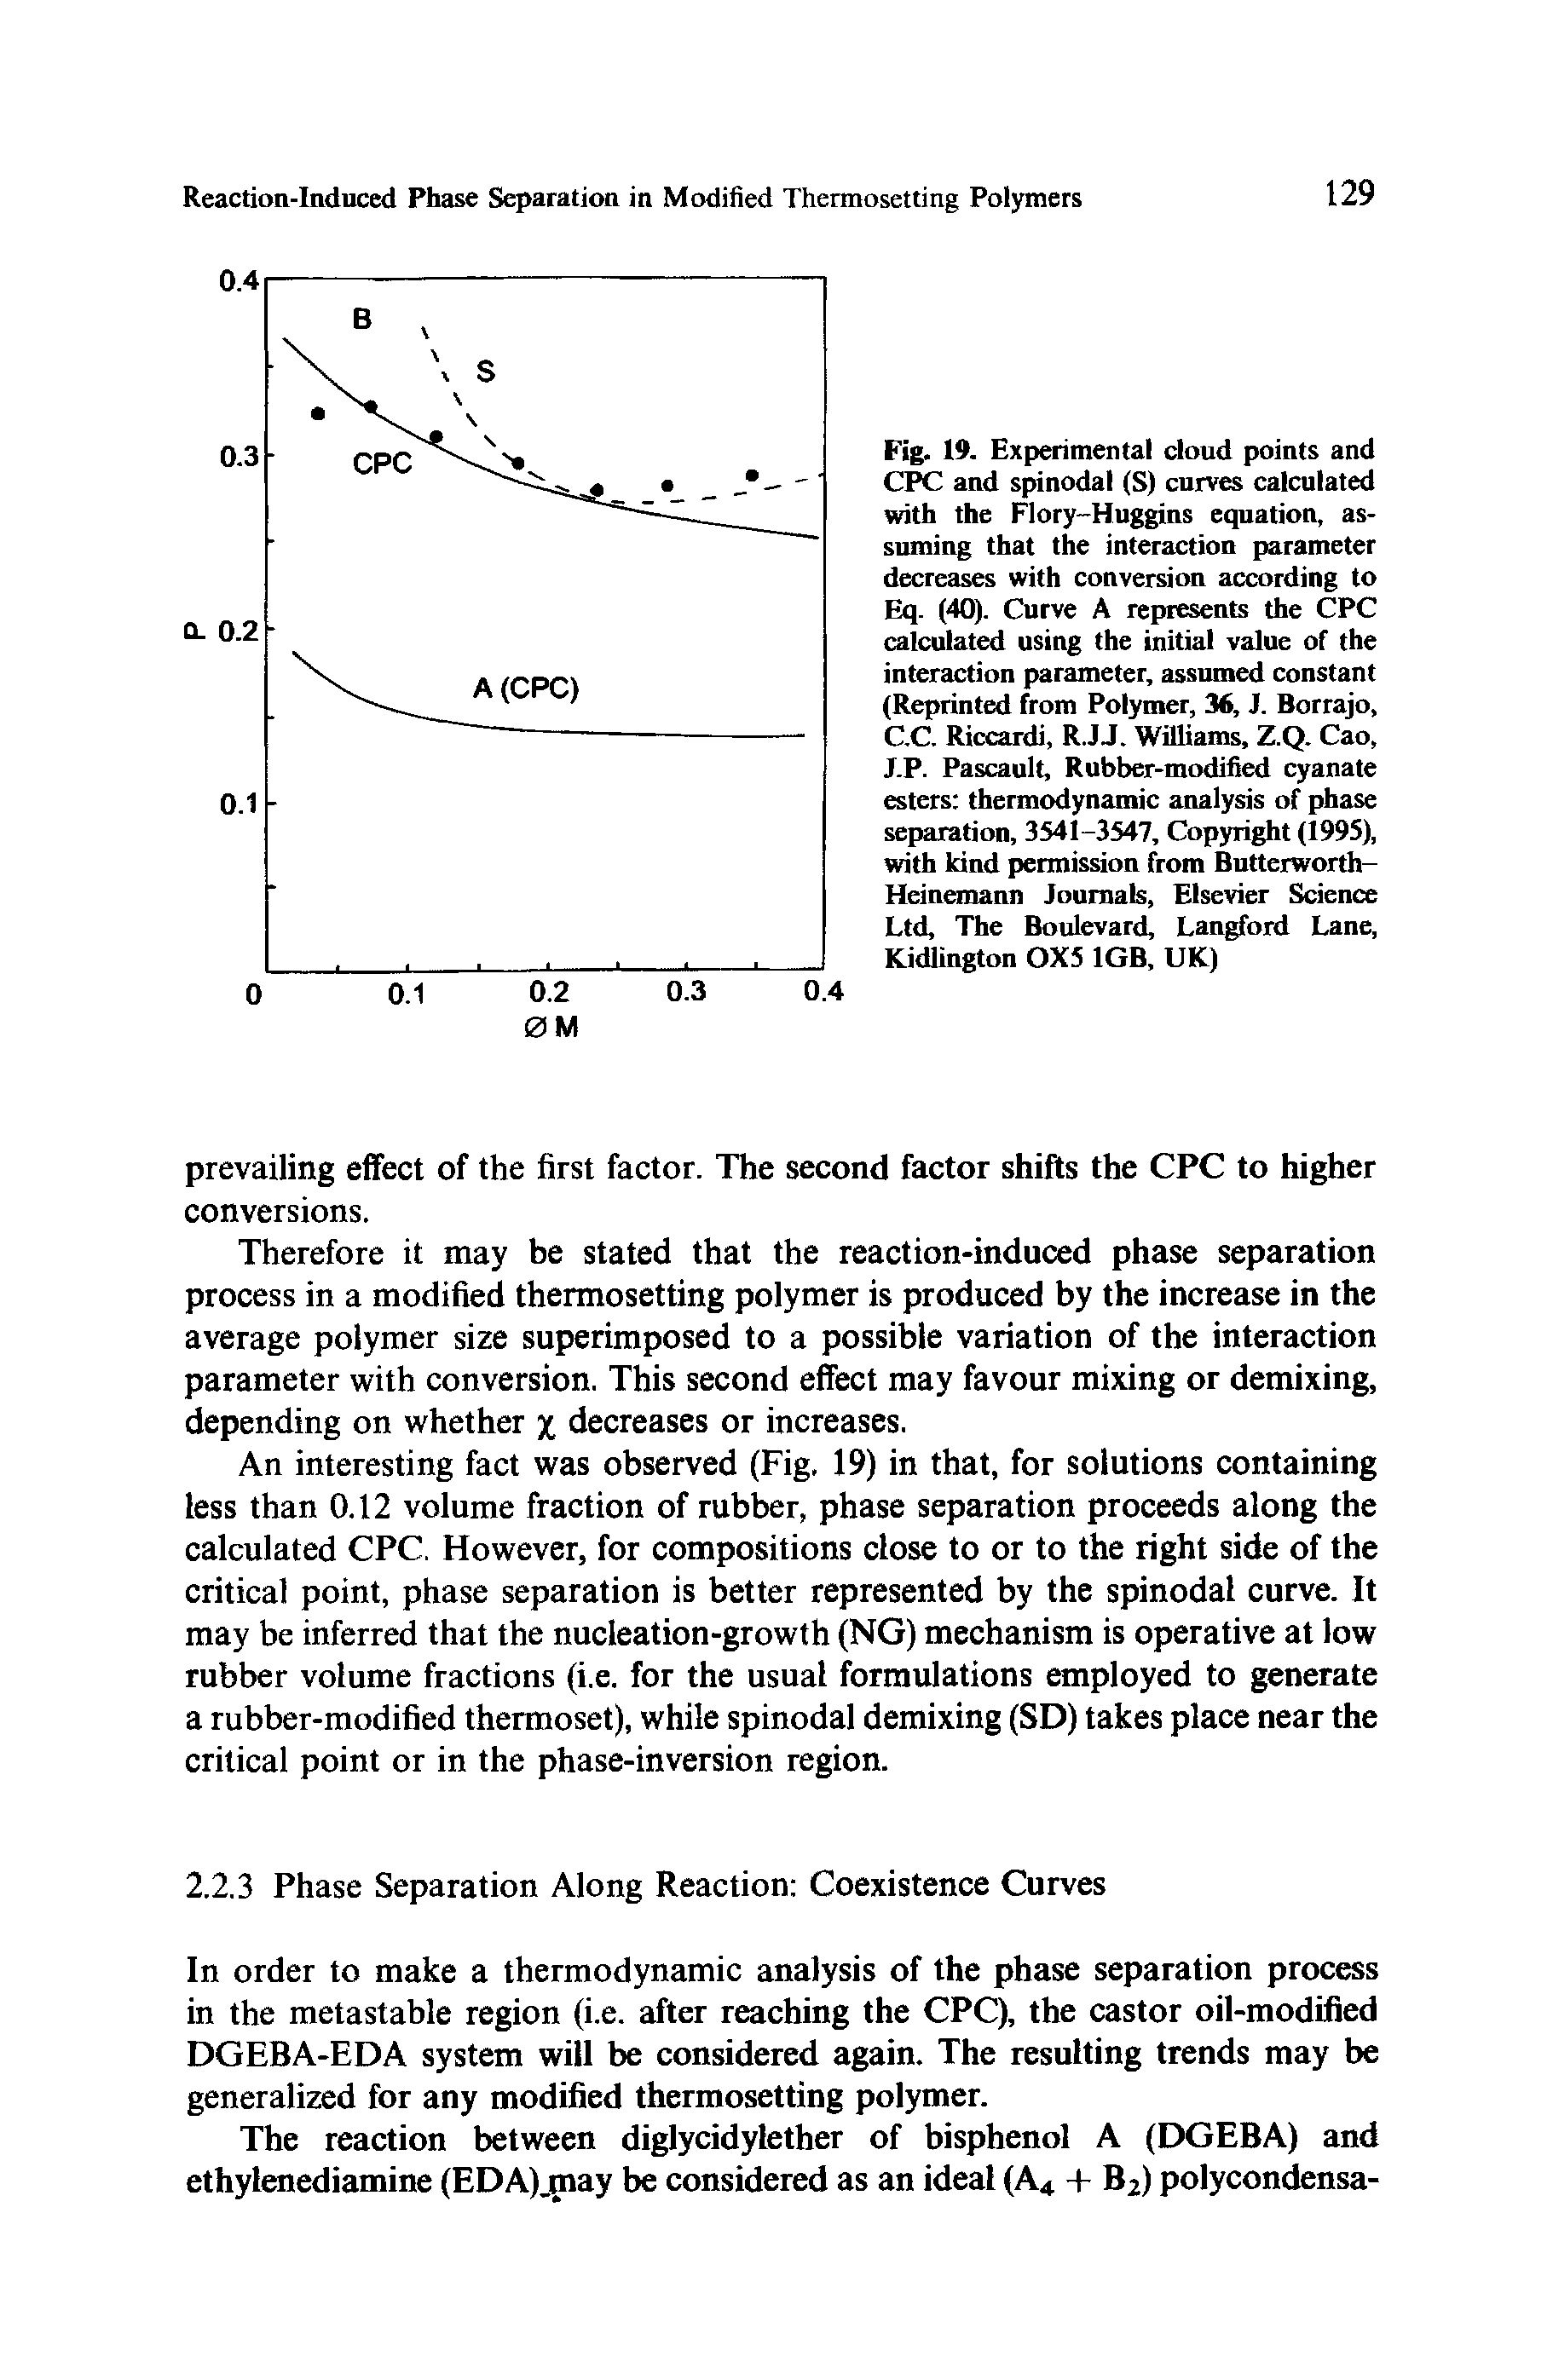 Fig. 19. Experimental doud points and CPC and spinodal (S) cnrves calculated with the Hory-Huggins equation, assuming that the interaction parameter decreases with conversion according to Eq. (40). Curve A represents the CPC calculated using the initial value of the interaction parameter, assumed constant (Reprinted from Polymer, M, J. Borrajo, C.C. Riccardi, R.JJ. Williams, Z.Q. Cao, J.P. Pascault, Rubber-modified cyanate esters thermodynamic analysis of phase separation, 3541-3547, Copyright (1995), with kind permission from Butterworth-Hejnemarm Journals, Elsevier Science Ltd, The Boulevard, Lan ord Lane, Kidlington 0X5 1GB, UK)...